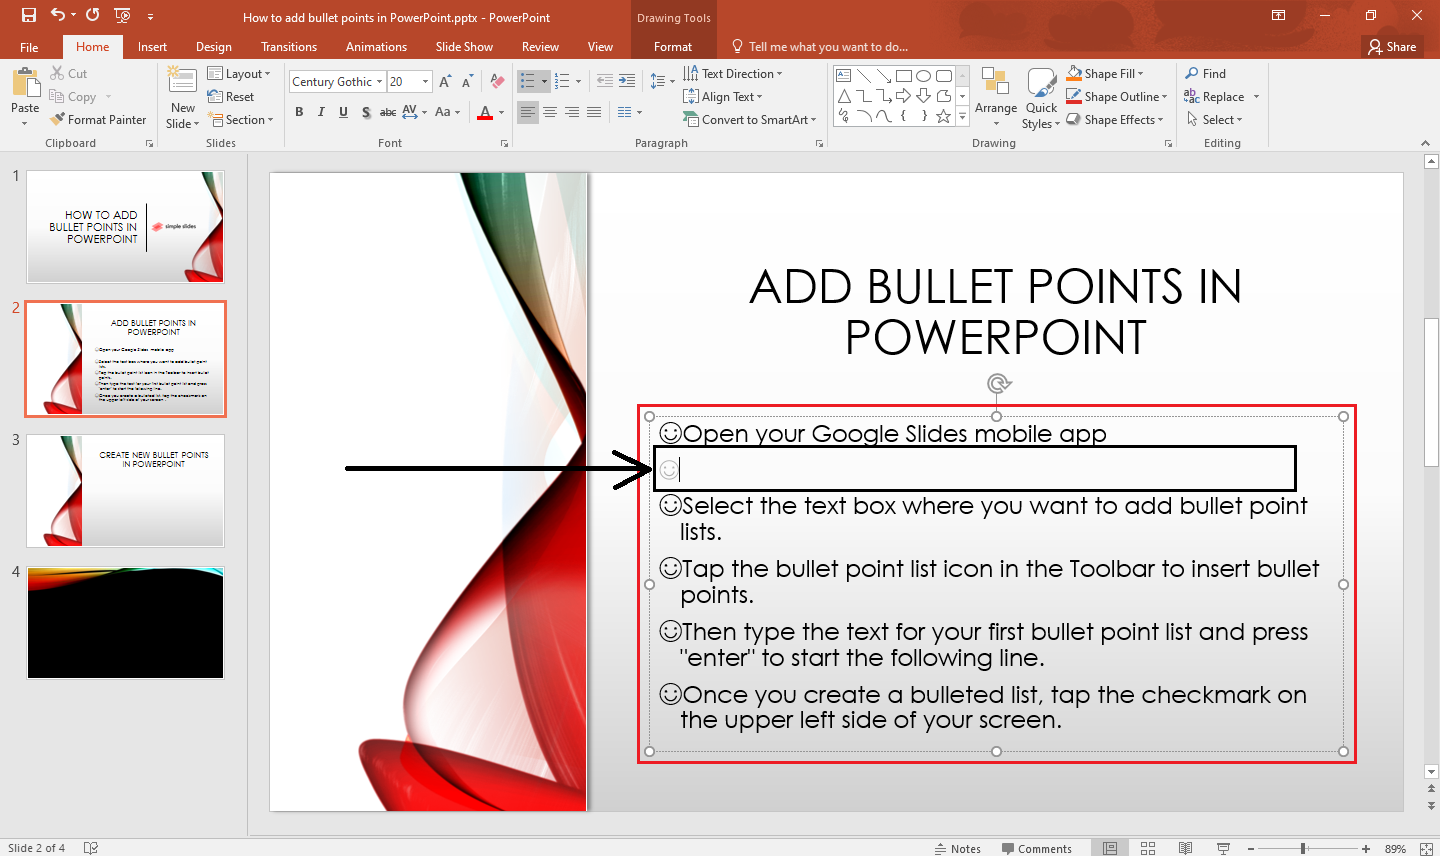 click the next line spacing where you want add sub-bullet point.